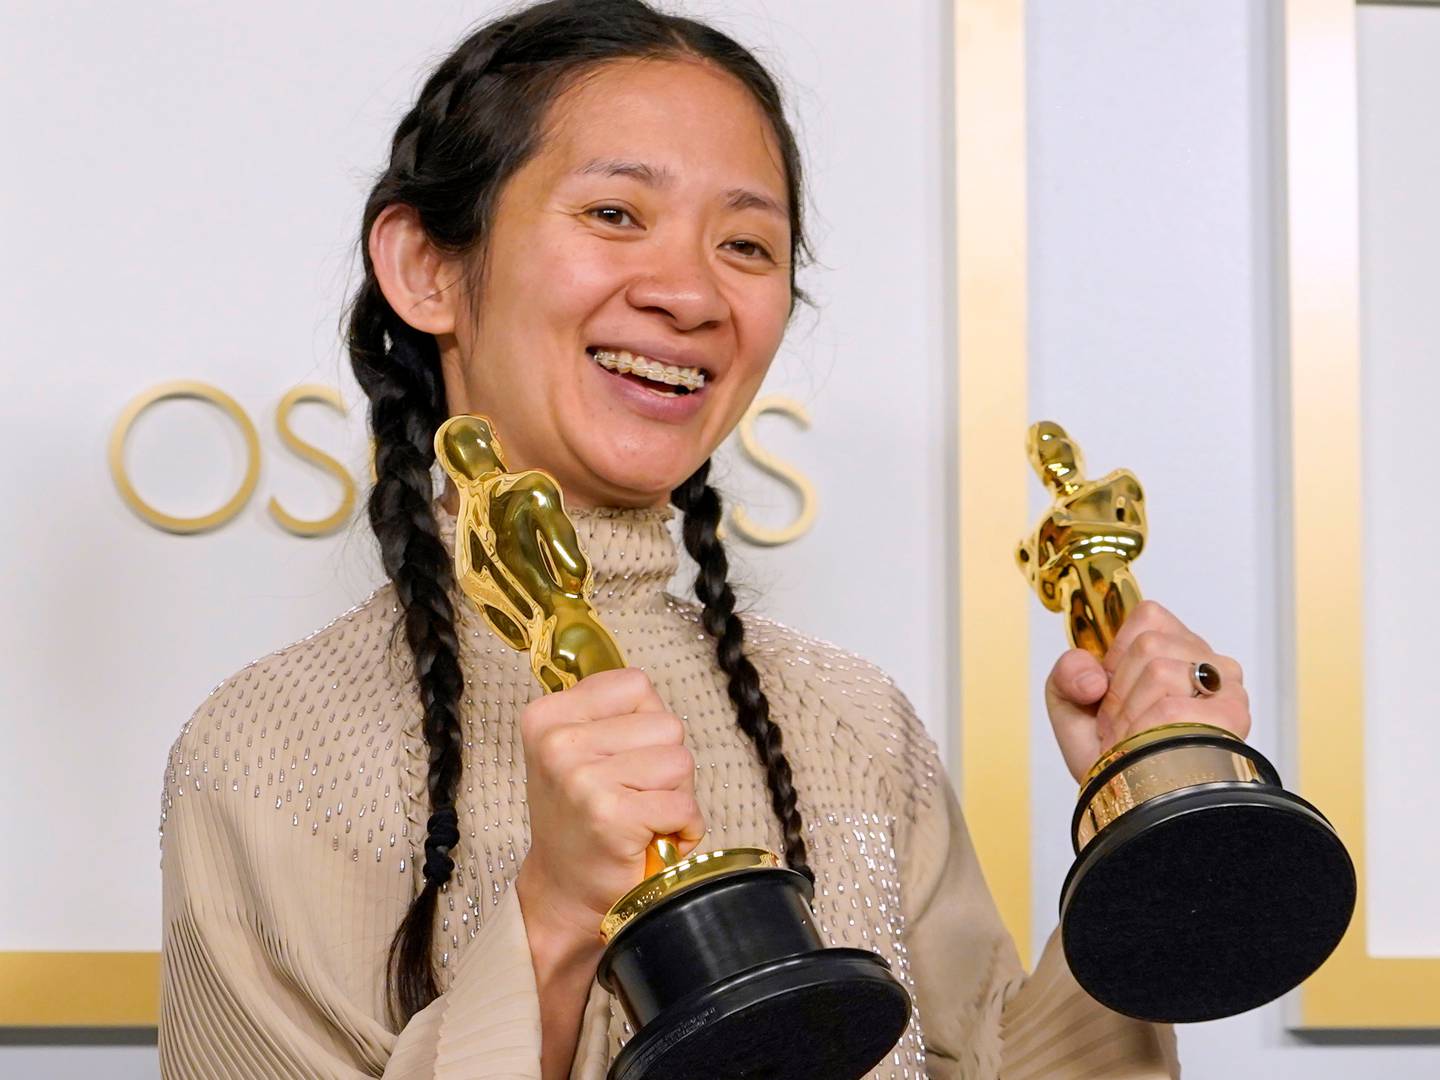 LOS ANGELES, CALIFORNIA - APRIL 25: Director/Producer Chloe Zhao, winner of Best Directing and Best Picture for "Nomadland," poses in the press room at the Oscars on Sunday, April 25, 2021. Getty Images.